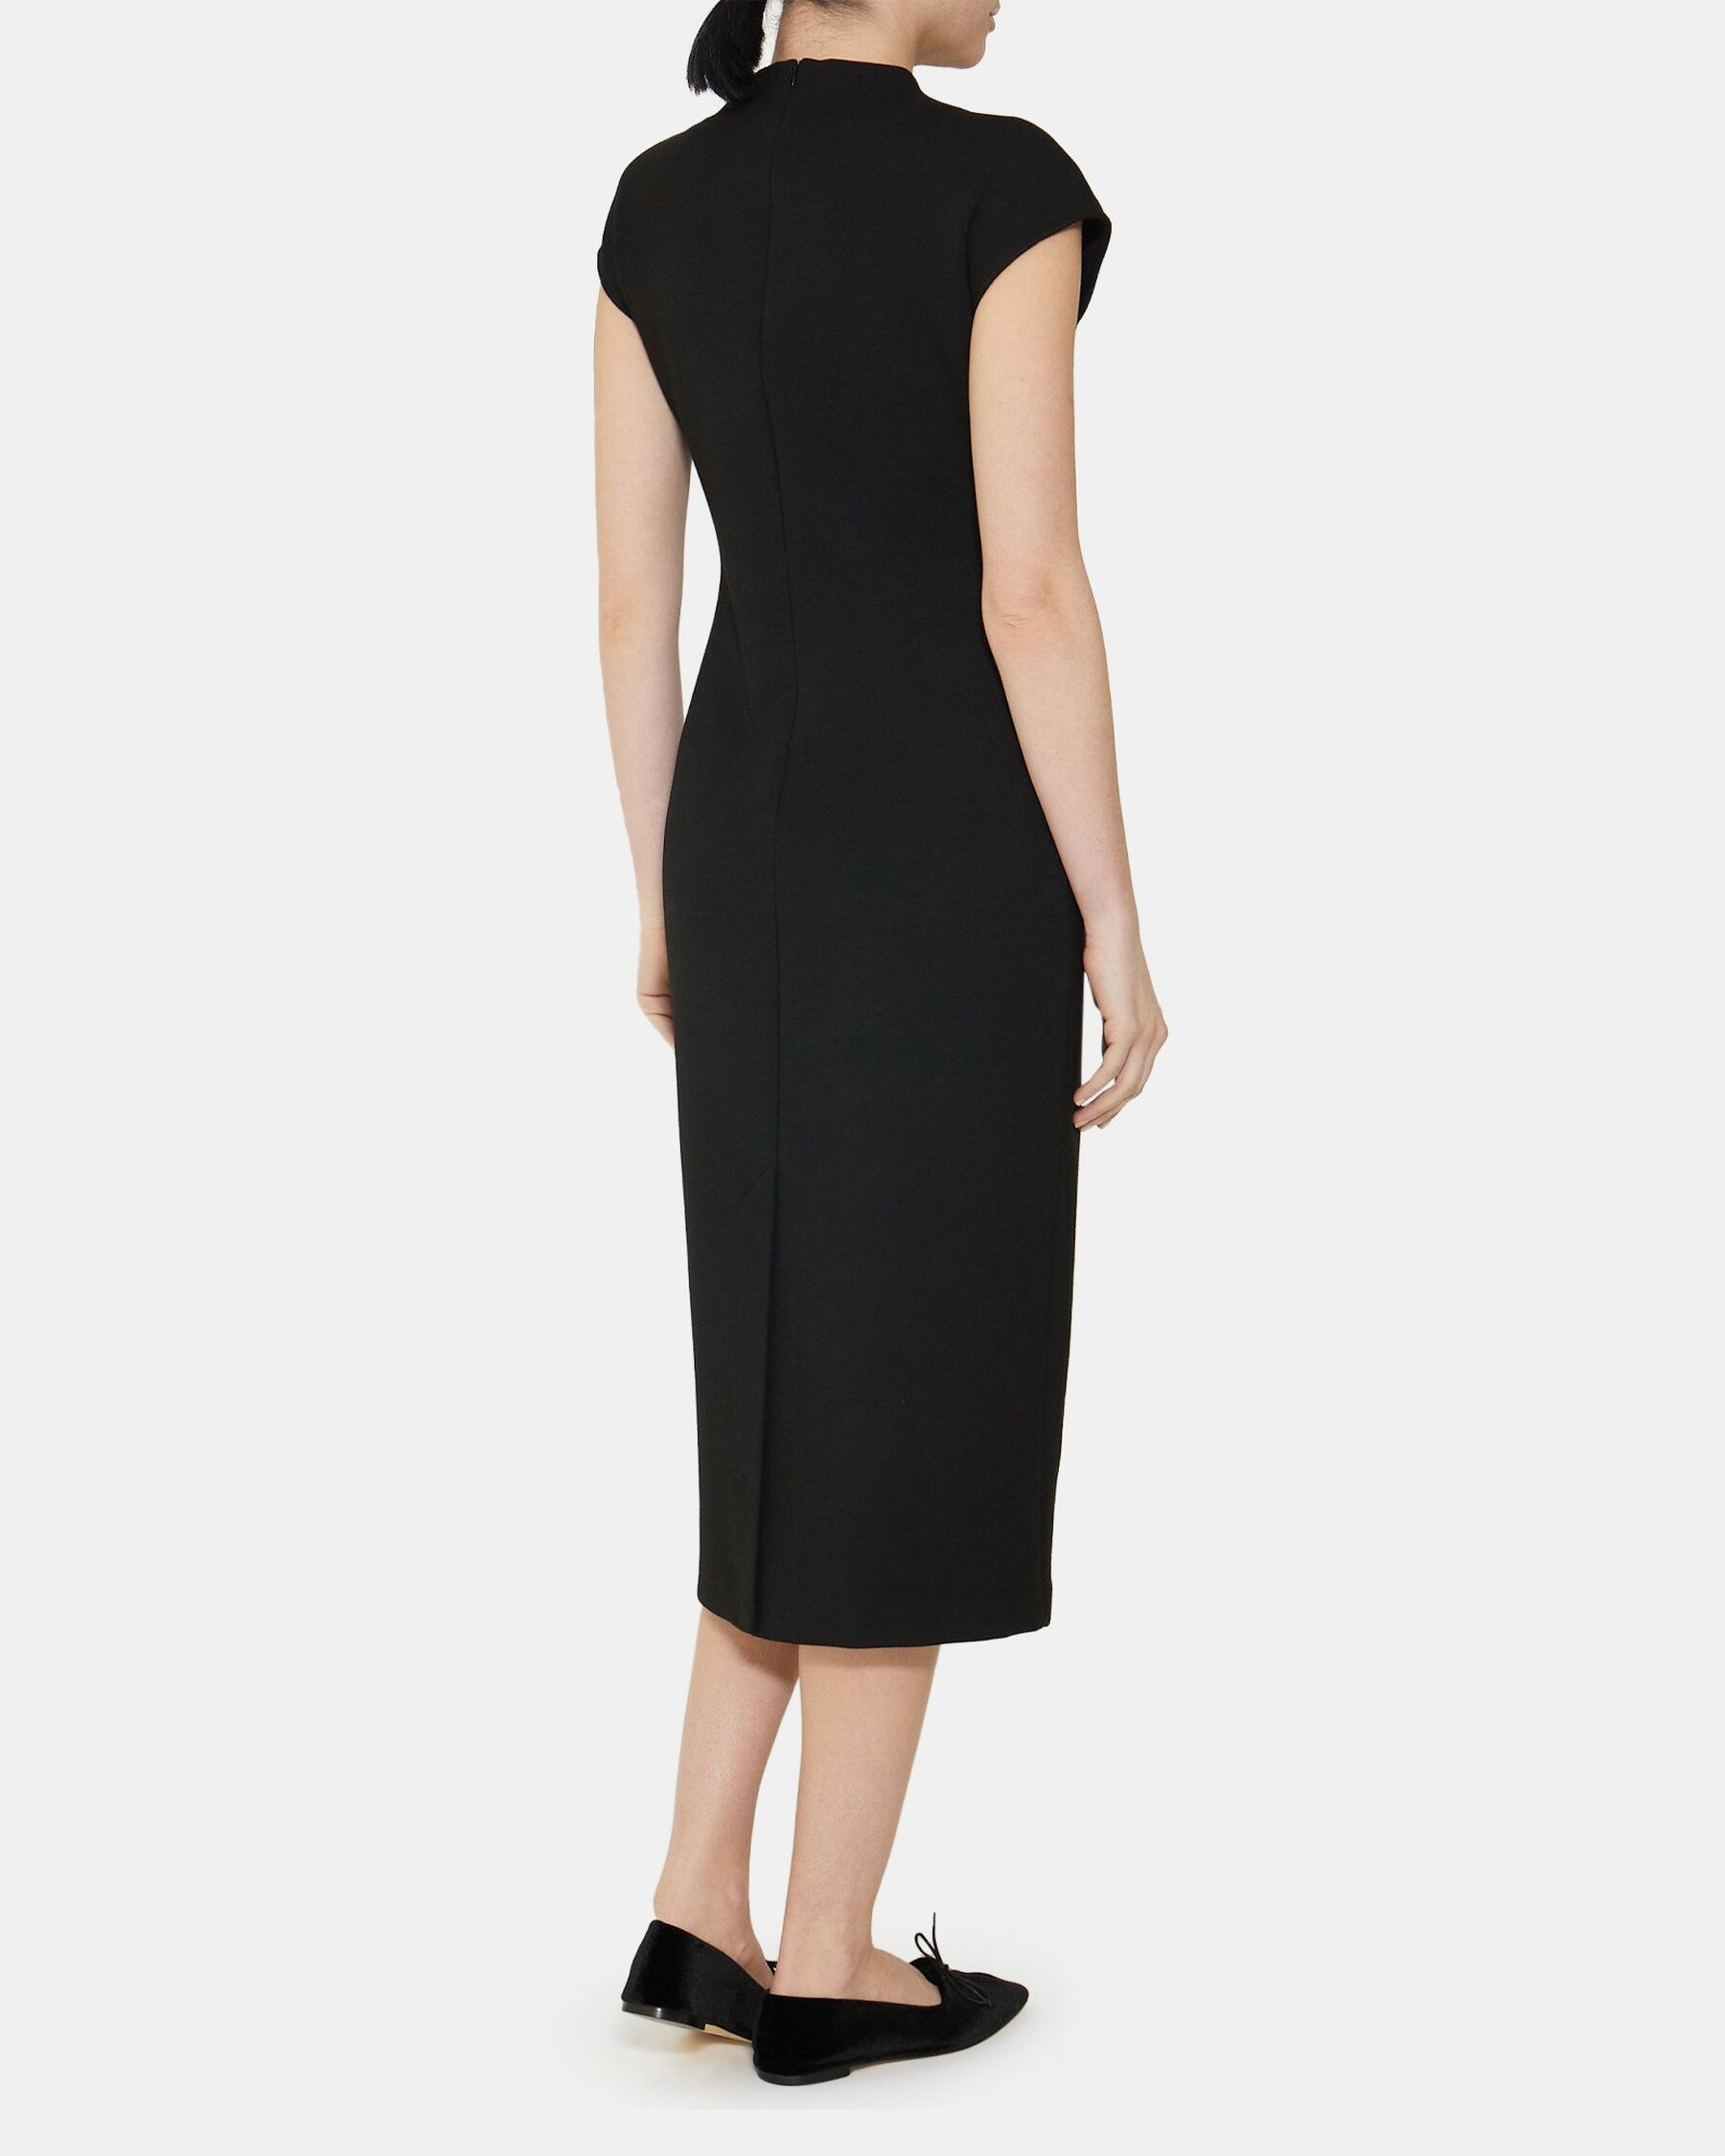 High-Neck Dress in Double-Knit Jersey